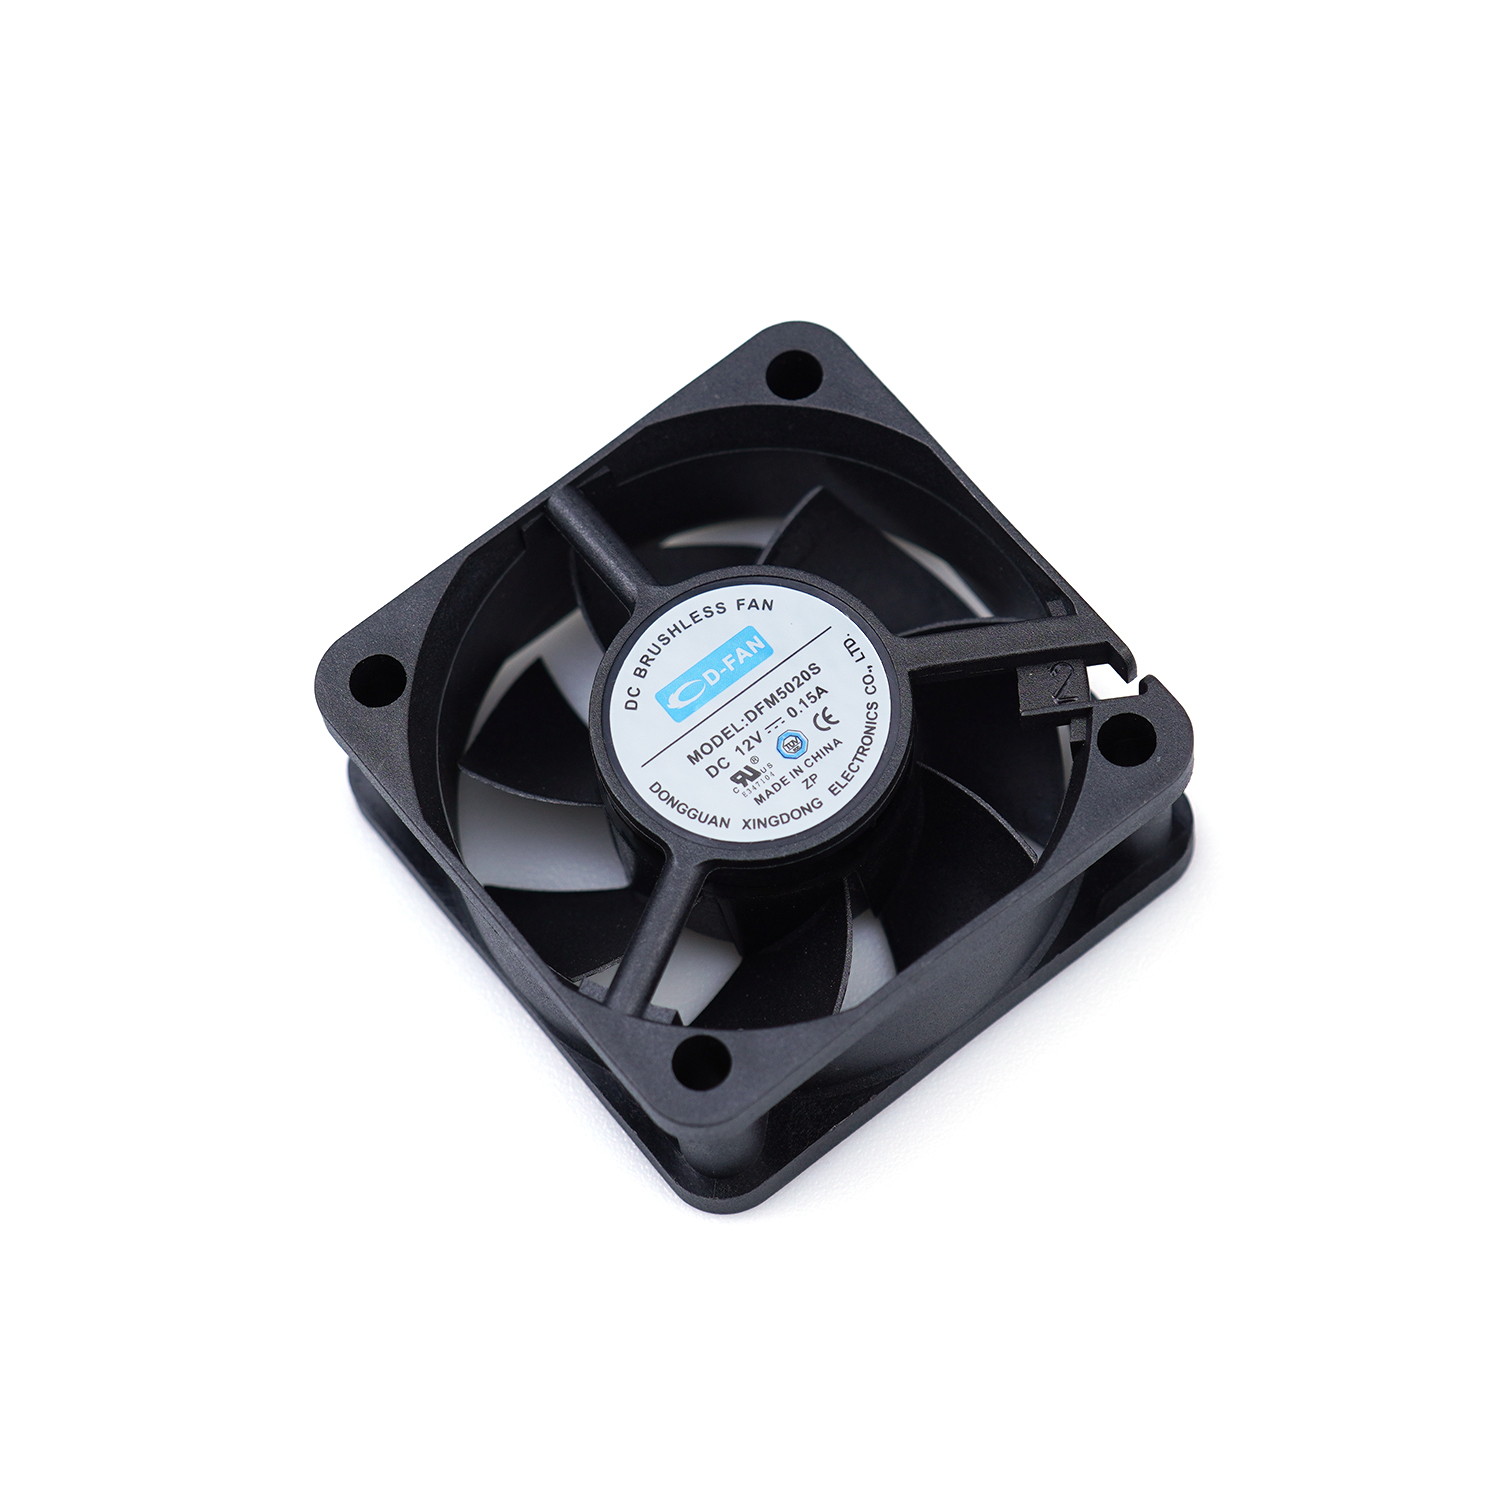  Air purifier 12v dc axial electric cooling fan